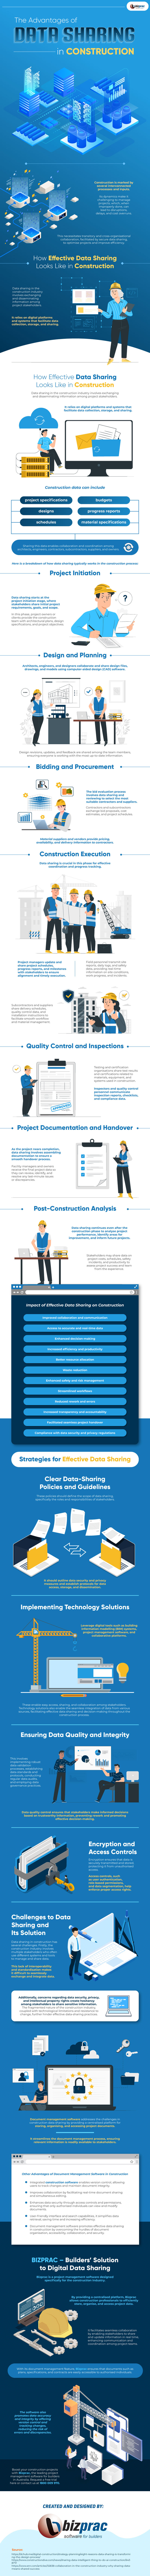 The-Advantages-of-Data-Sharing-in-Construction-Infographic-image-001